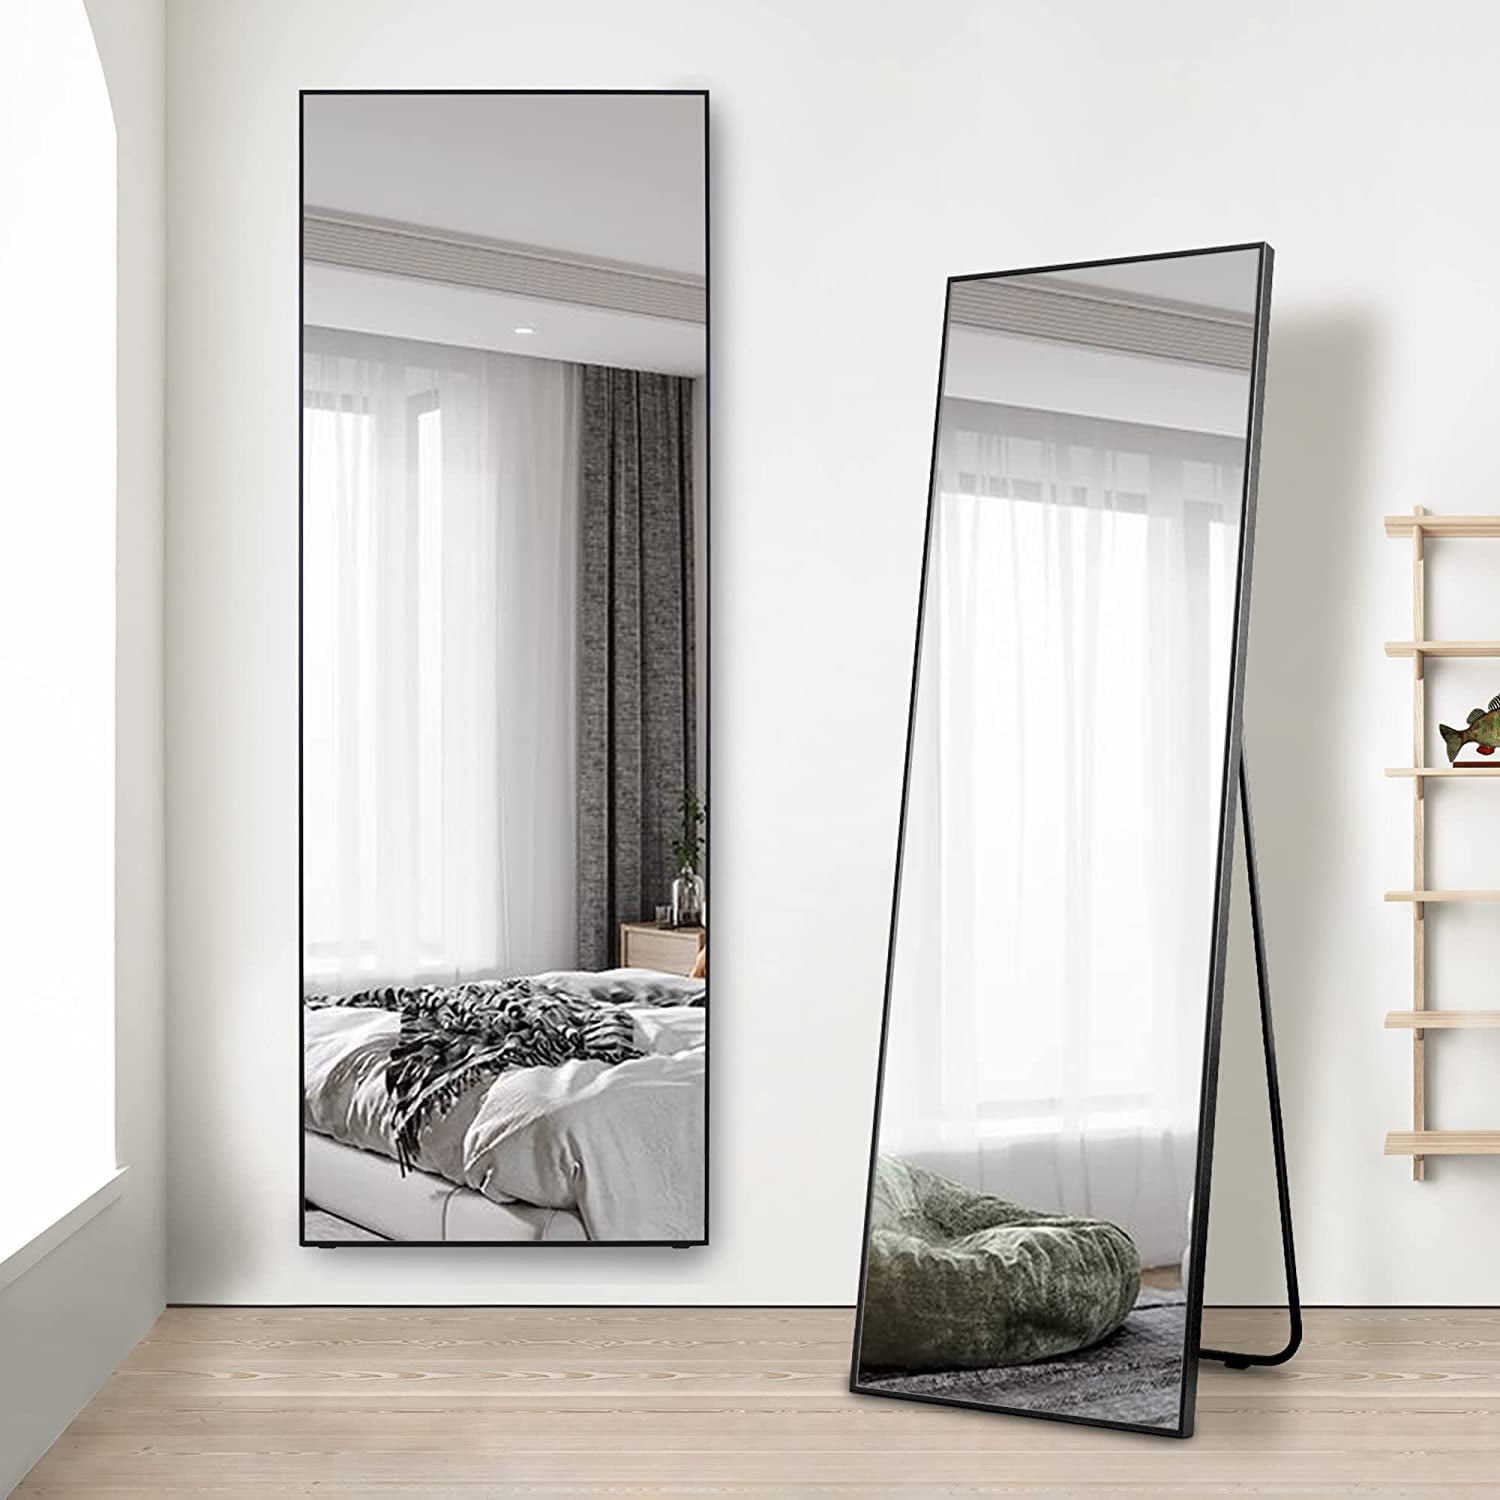 ZXNYH Wall Mounted Mirror, 47